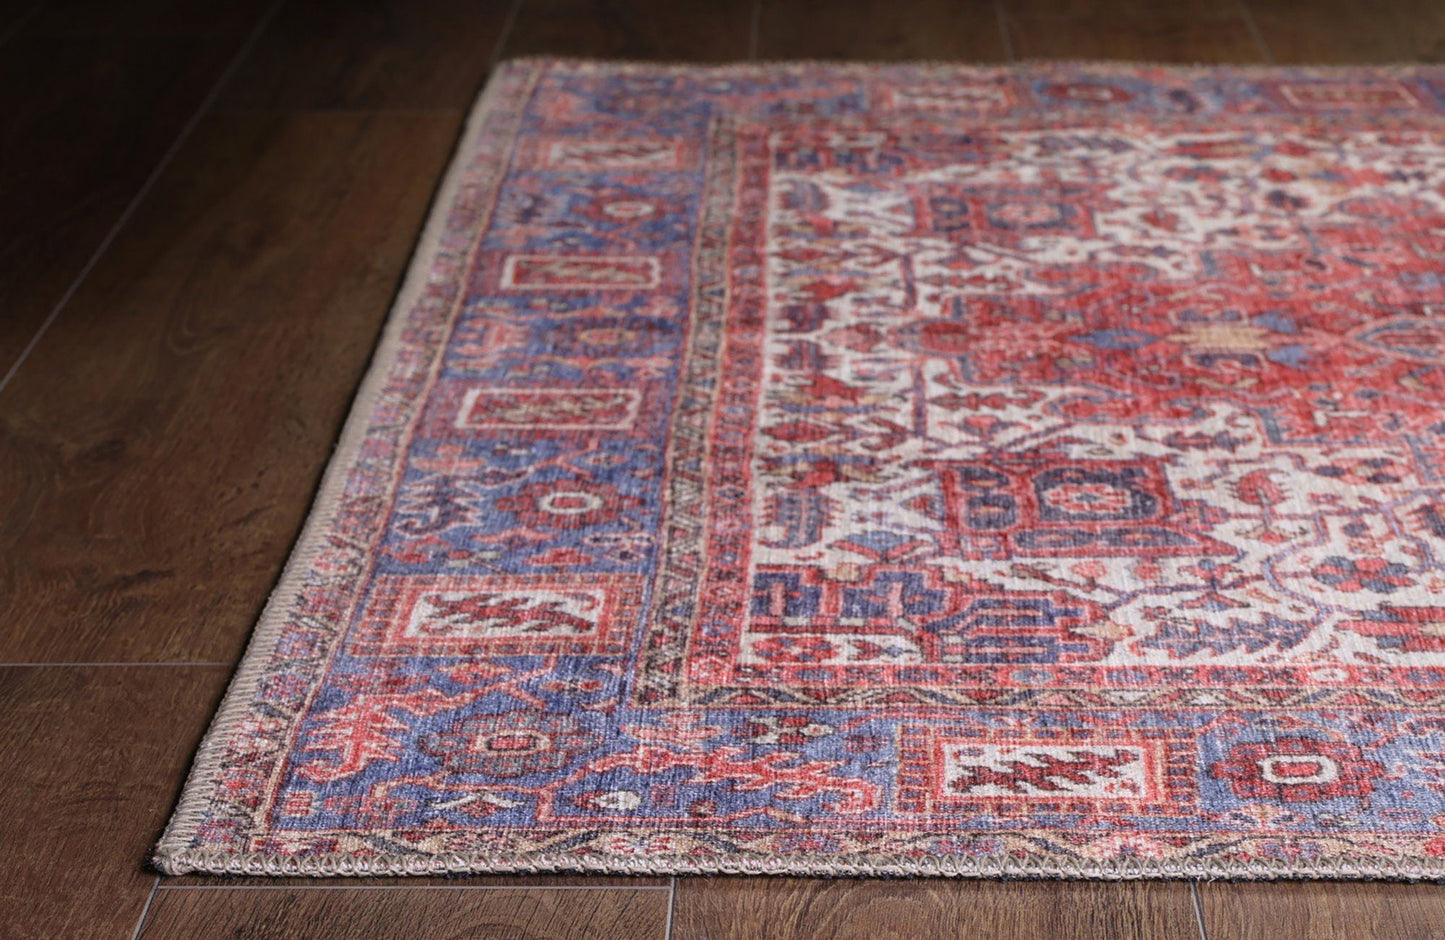 SARA | Antique Persian Heriz Pattern Red Hot Pink Oriental Rug, Hand-knotted texture Traditional Mid-century Area Rugs, Tribal Ethnic Carpet